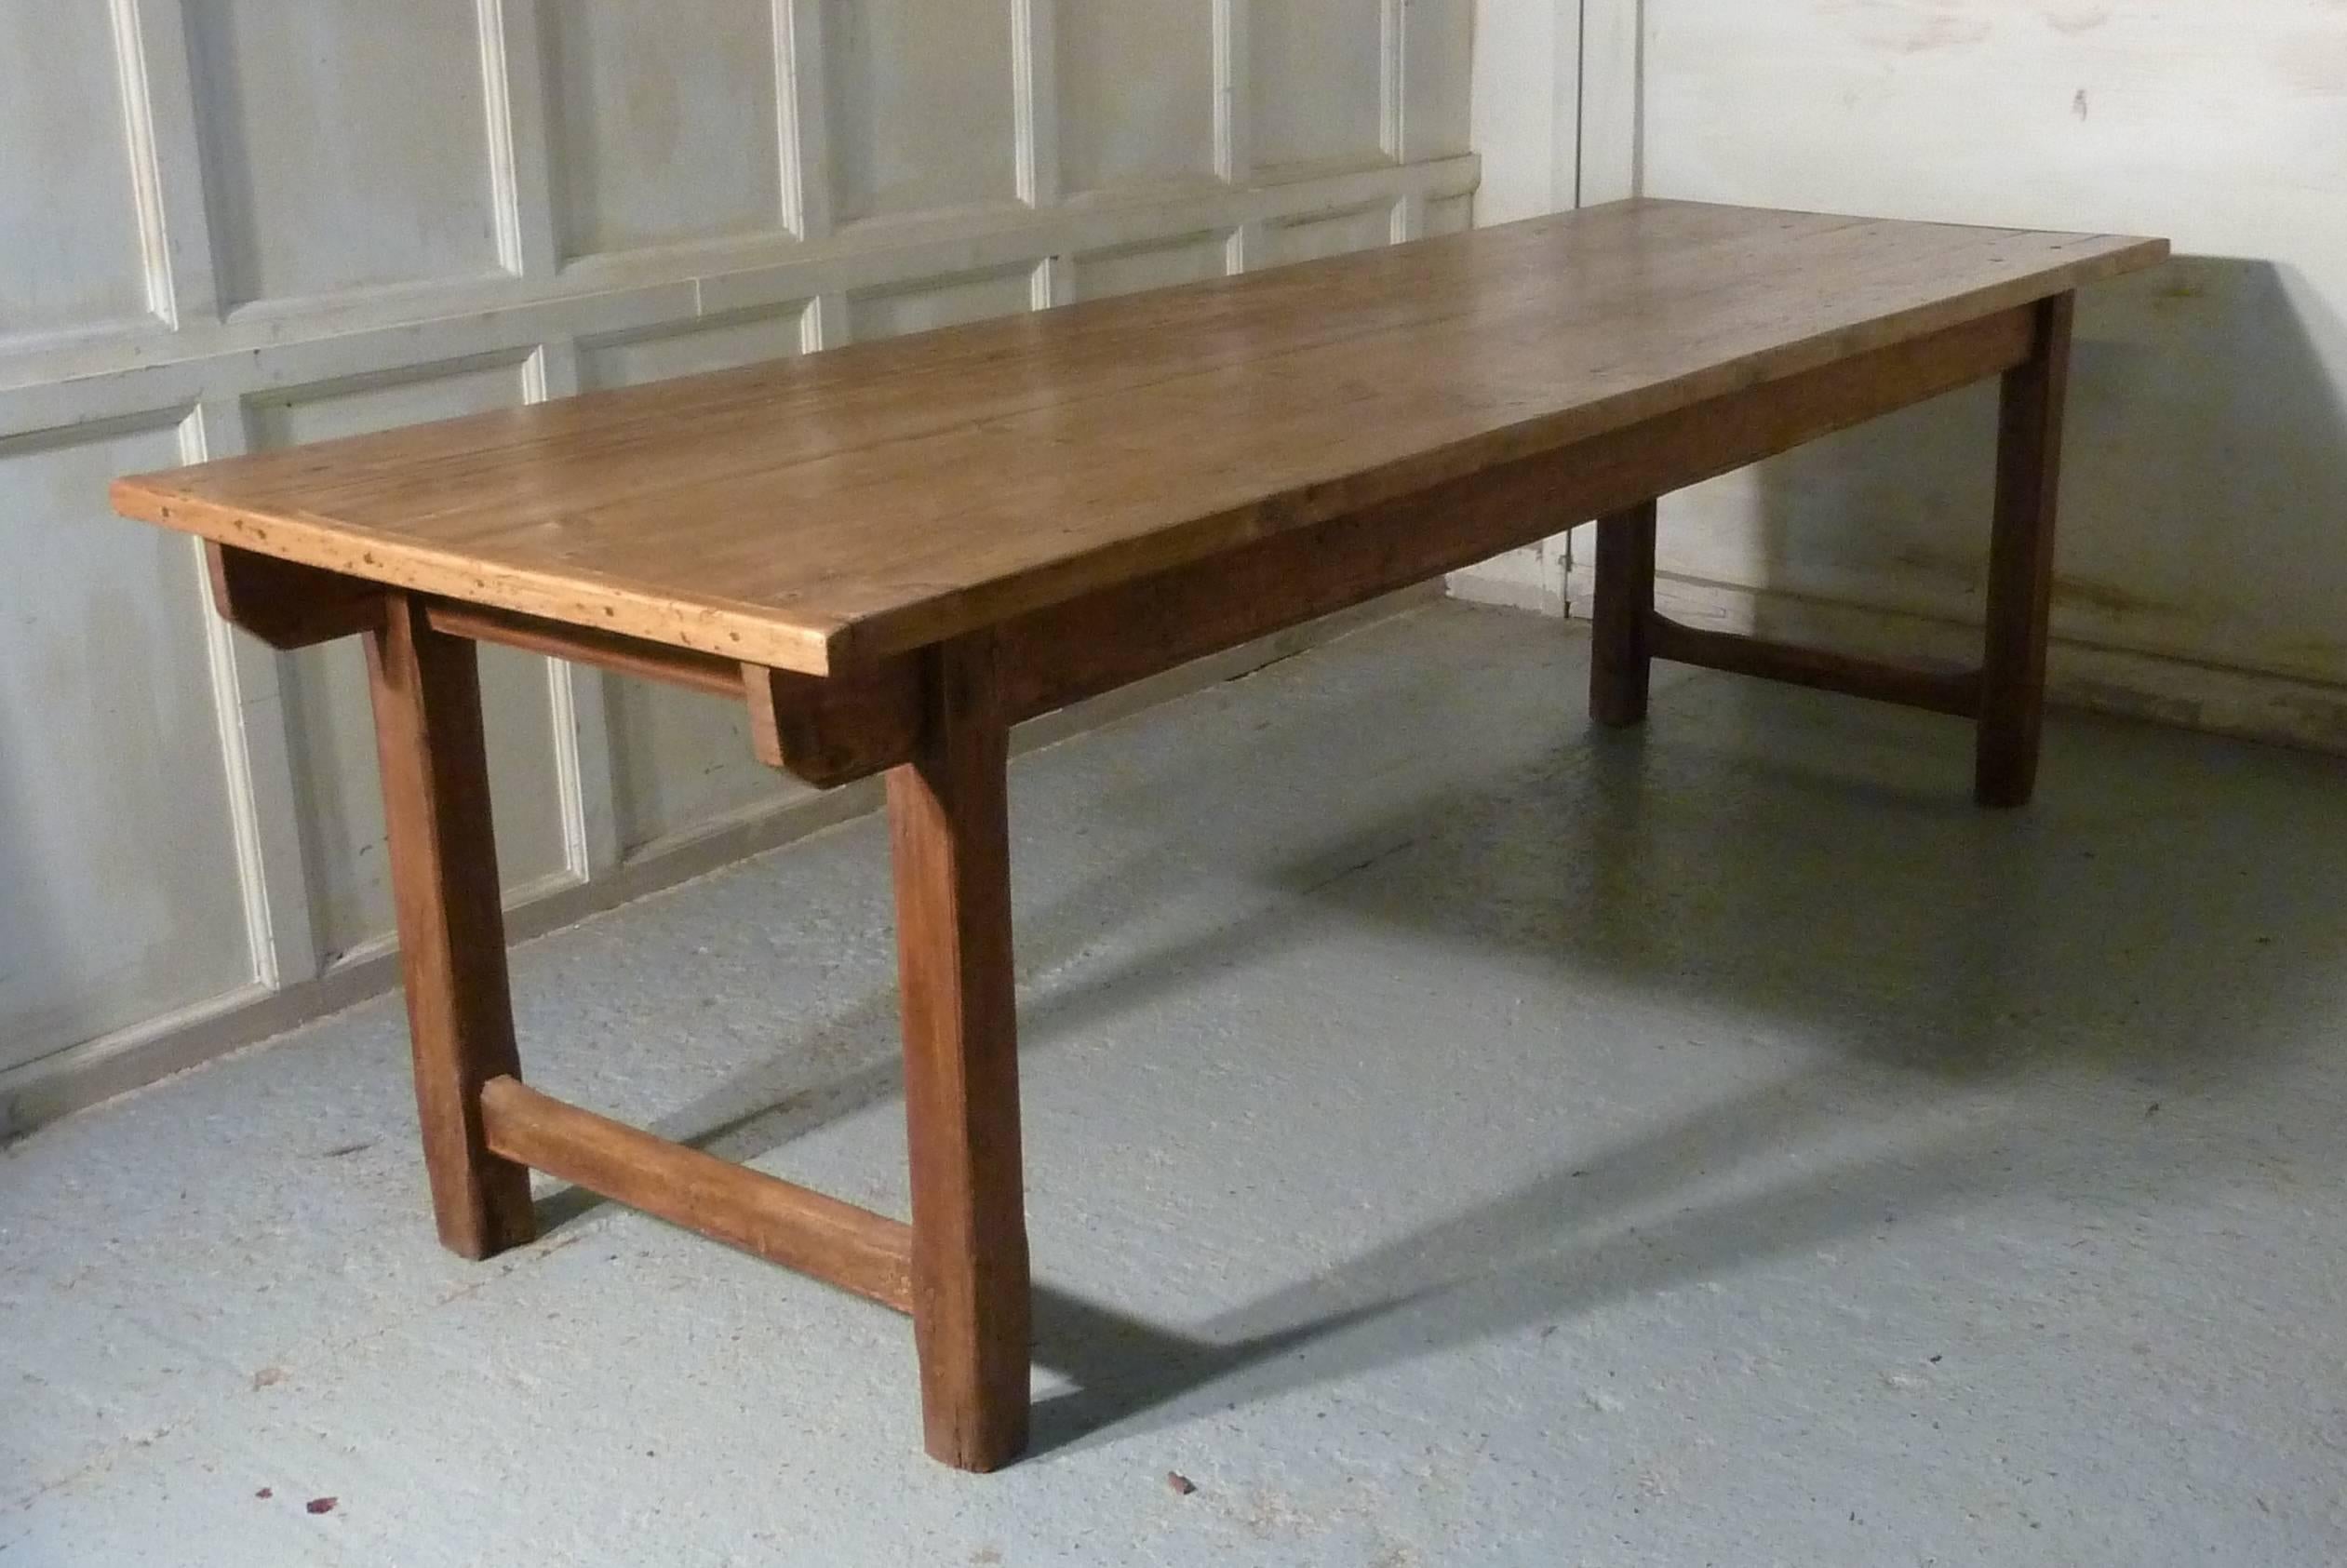 French Provincial Large 19th Century French Rustic Pine Table, Cleated 2 Plank Farmhouse Top